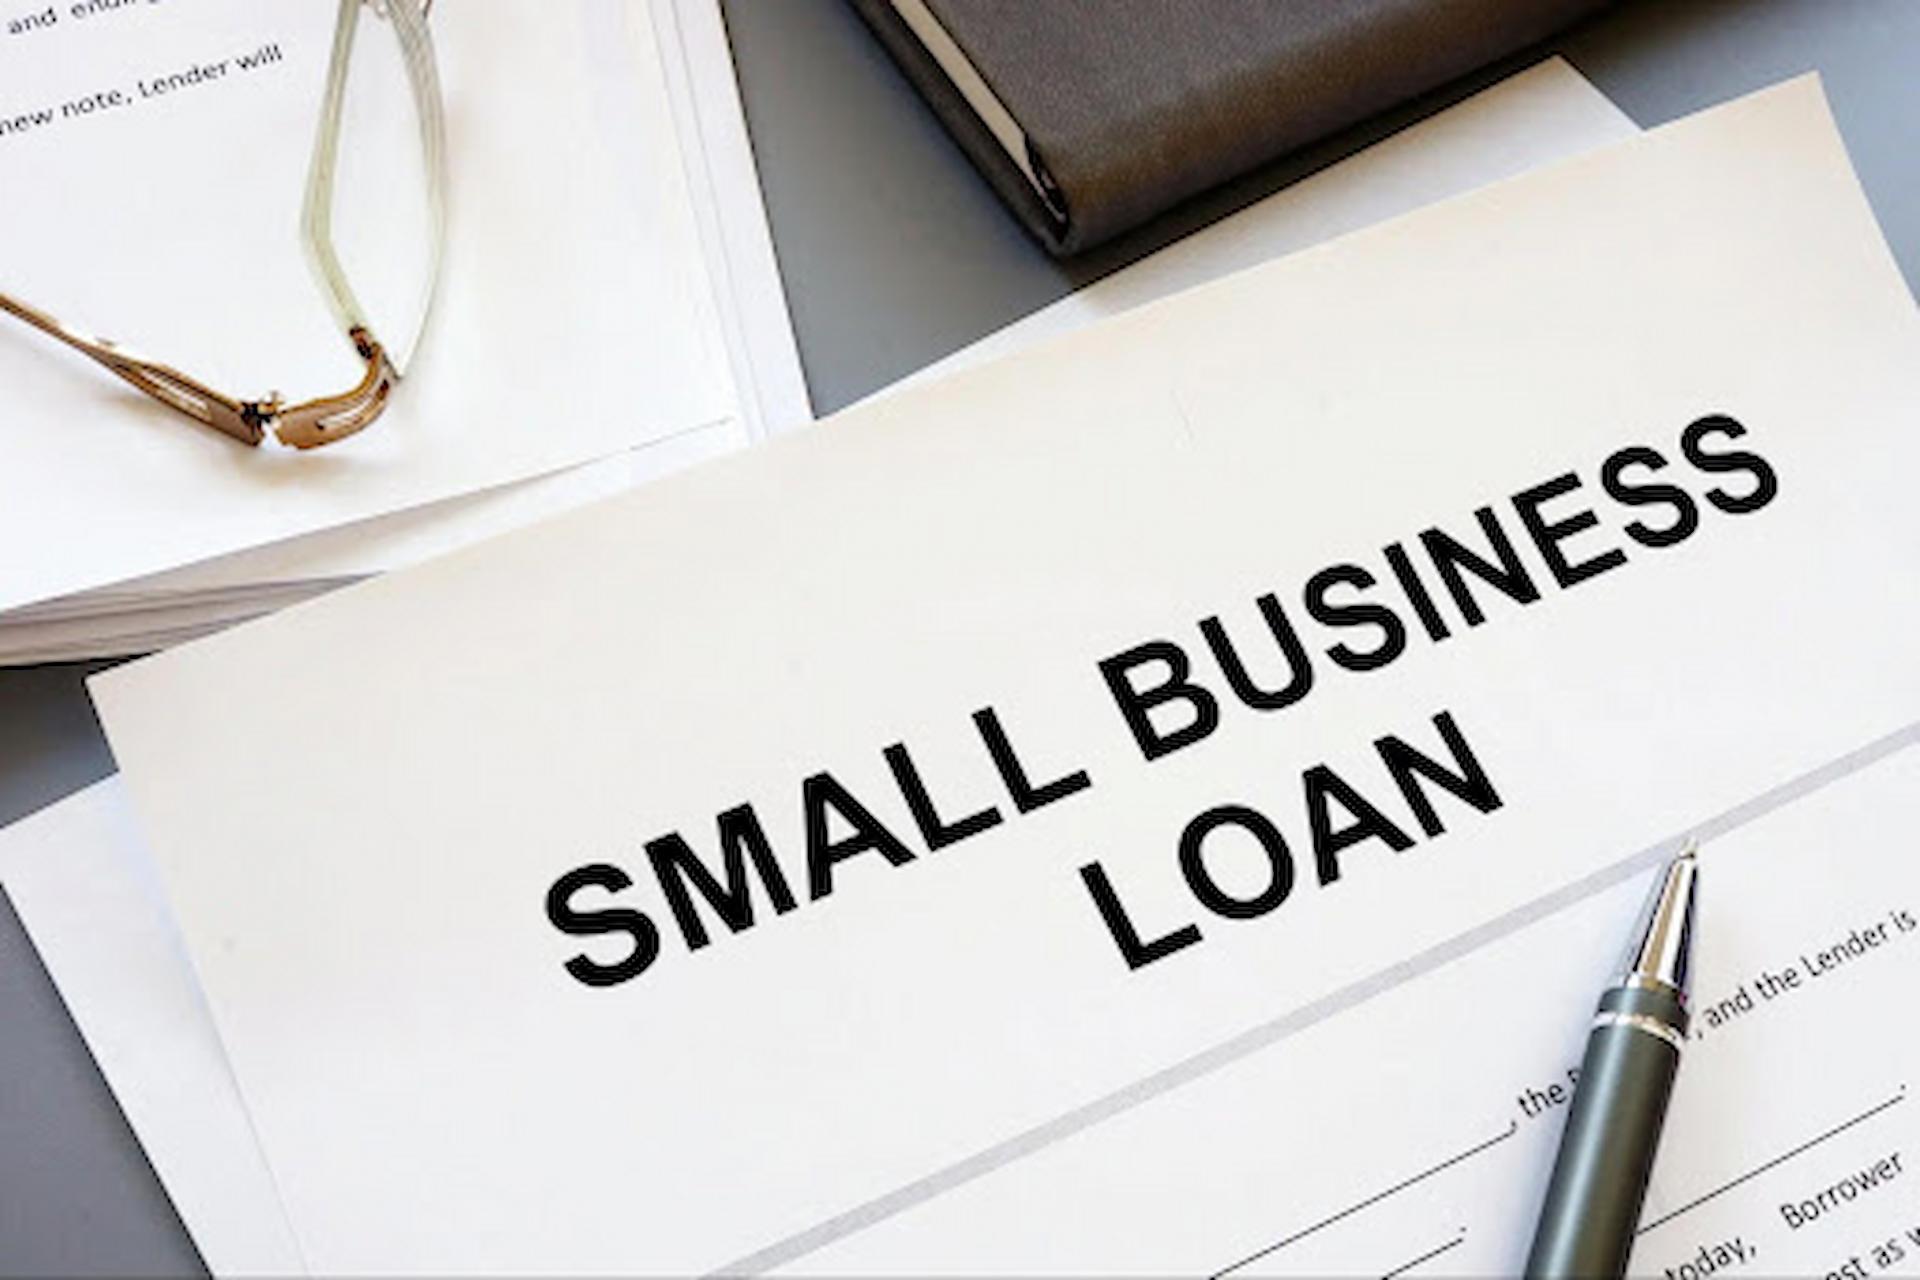 Securing Small Loans: Tips for a Smooth Application Process